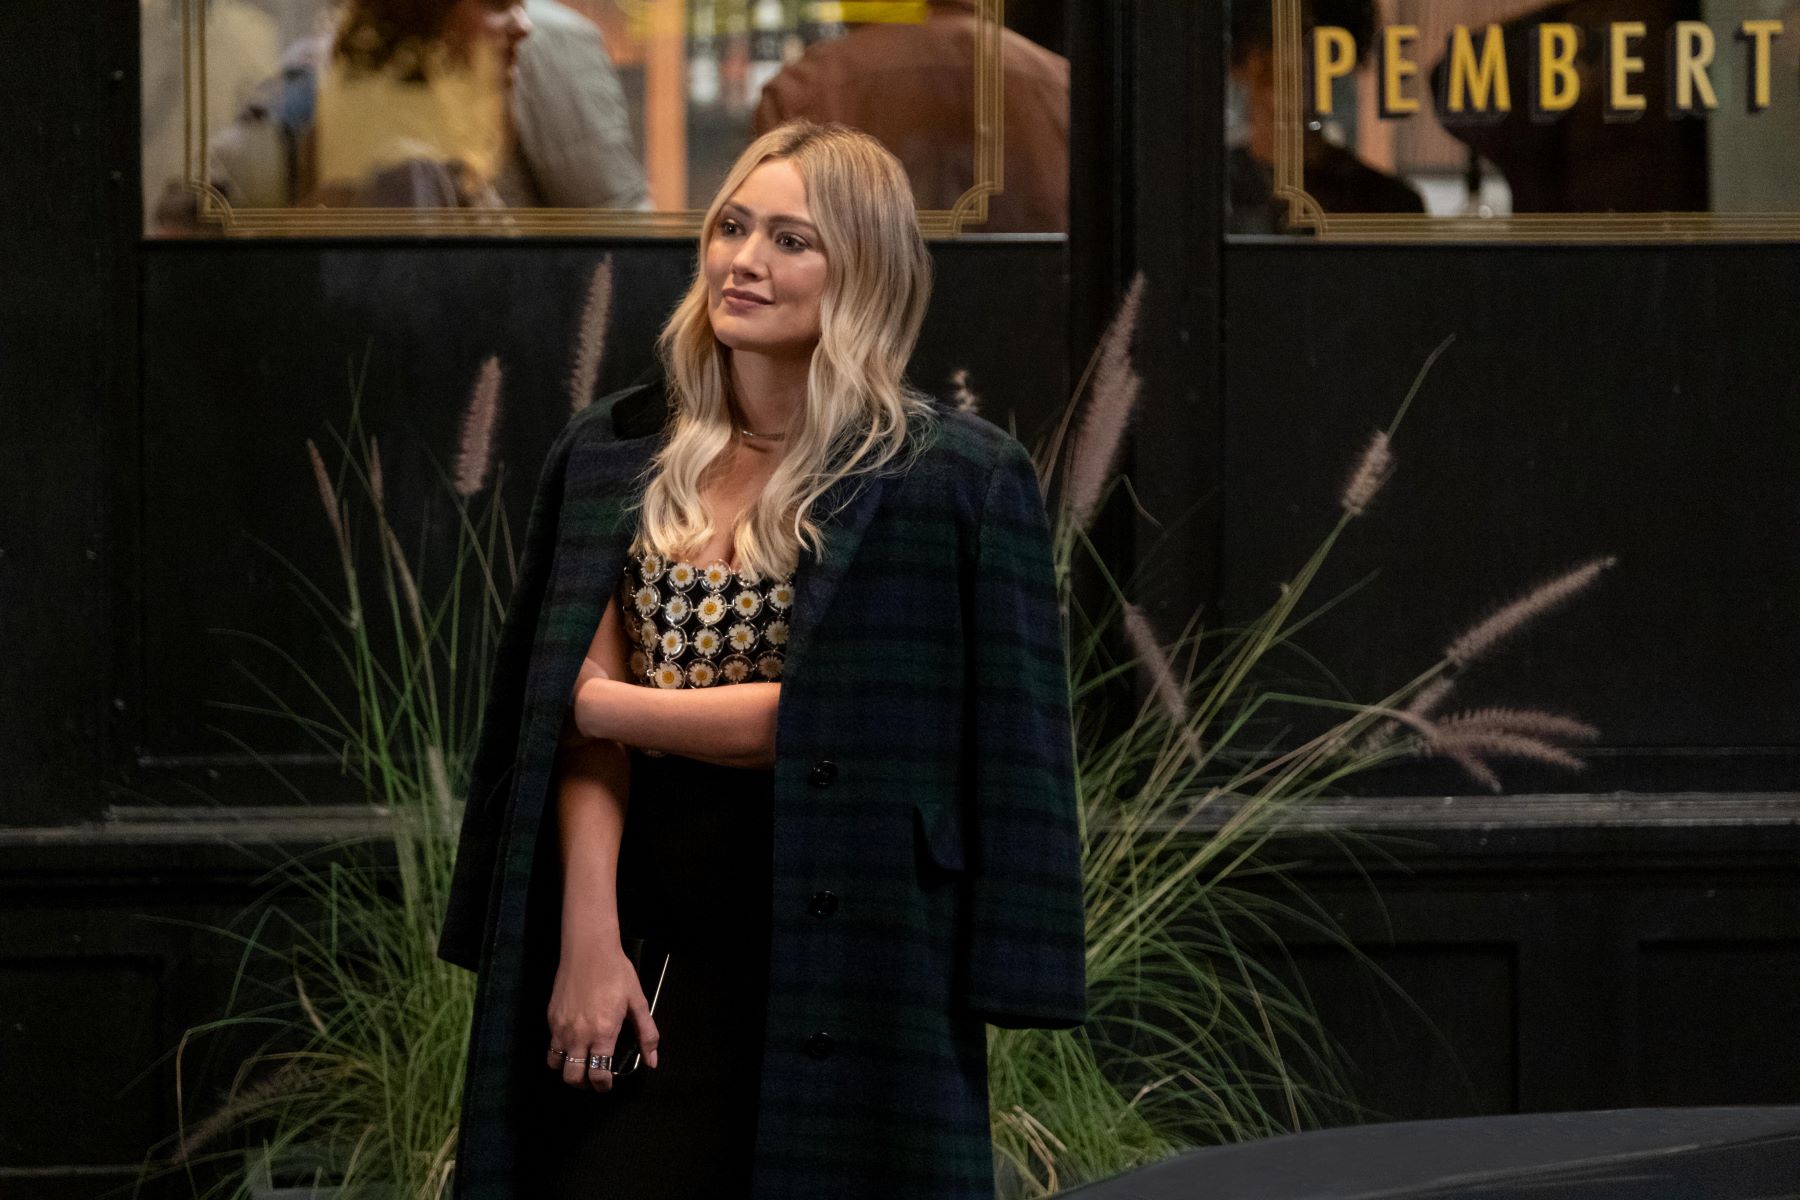 Hilary Duff, in character as Sophie in 'How I Met Your Father' Season 2 Episode 1, wears a dark blue and green plaid coat over a daisy tank top and black skirt.